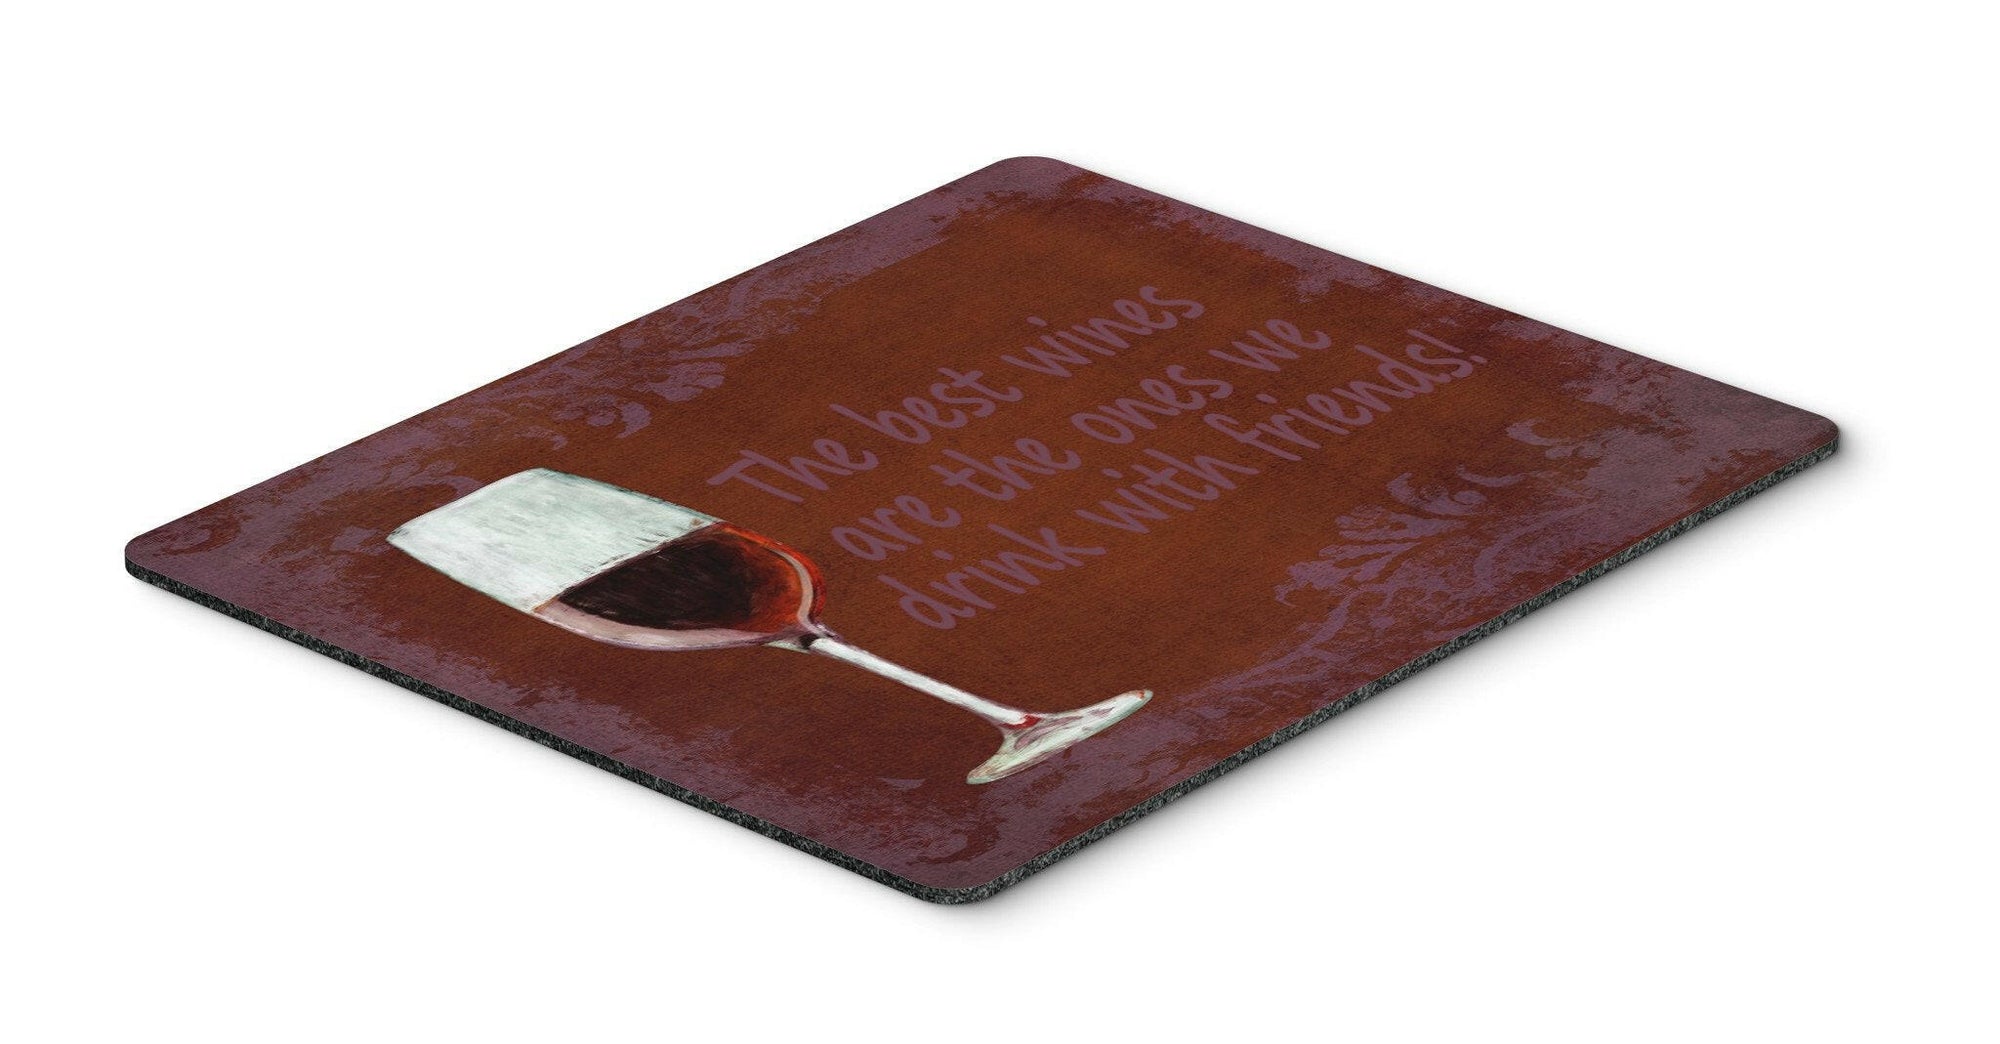 The best wines are the ones we drink with friends Mouse Pad, Hot Pad or Trivet SB3068MP by Caroline's Treasures